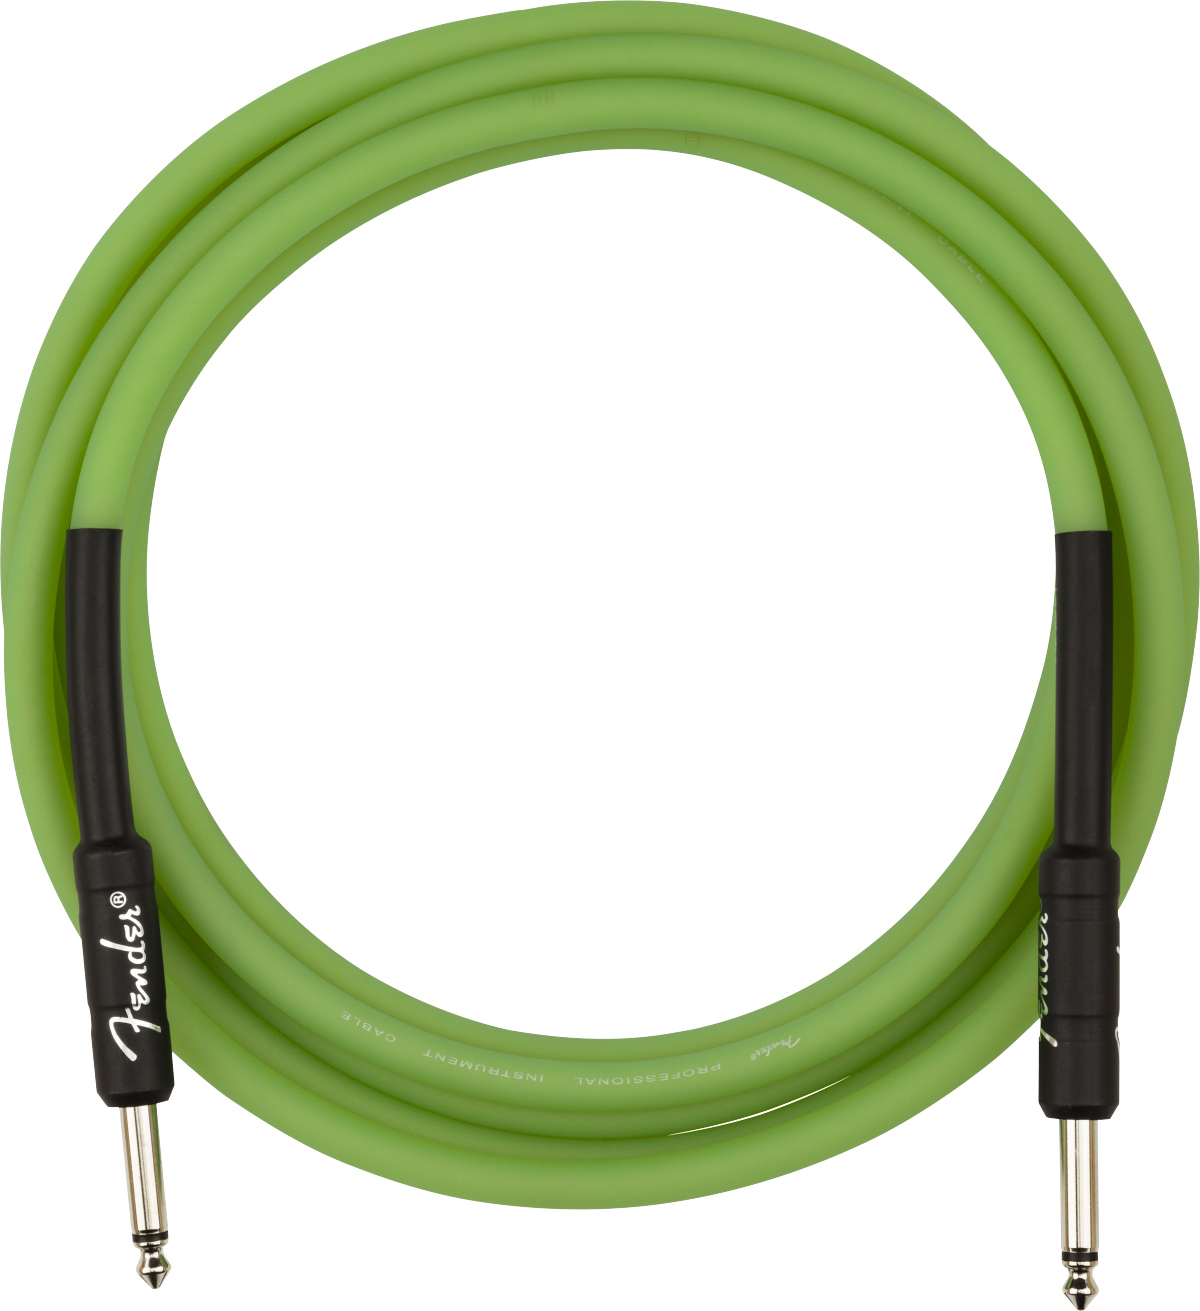 Fender Pro Glow In The Dark Instrument Cable Droit/droit 10ft Green - Cable - Main picture